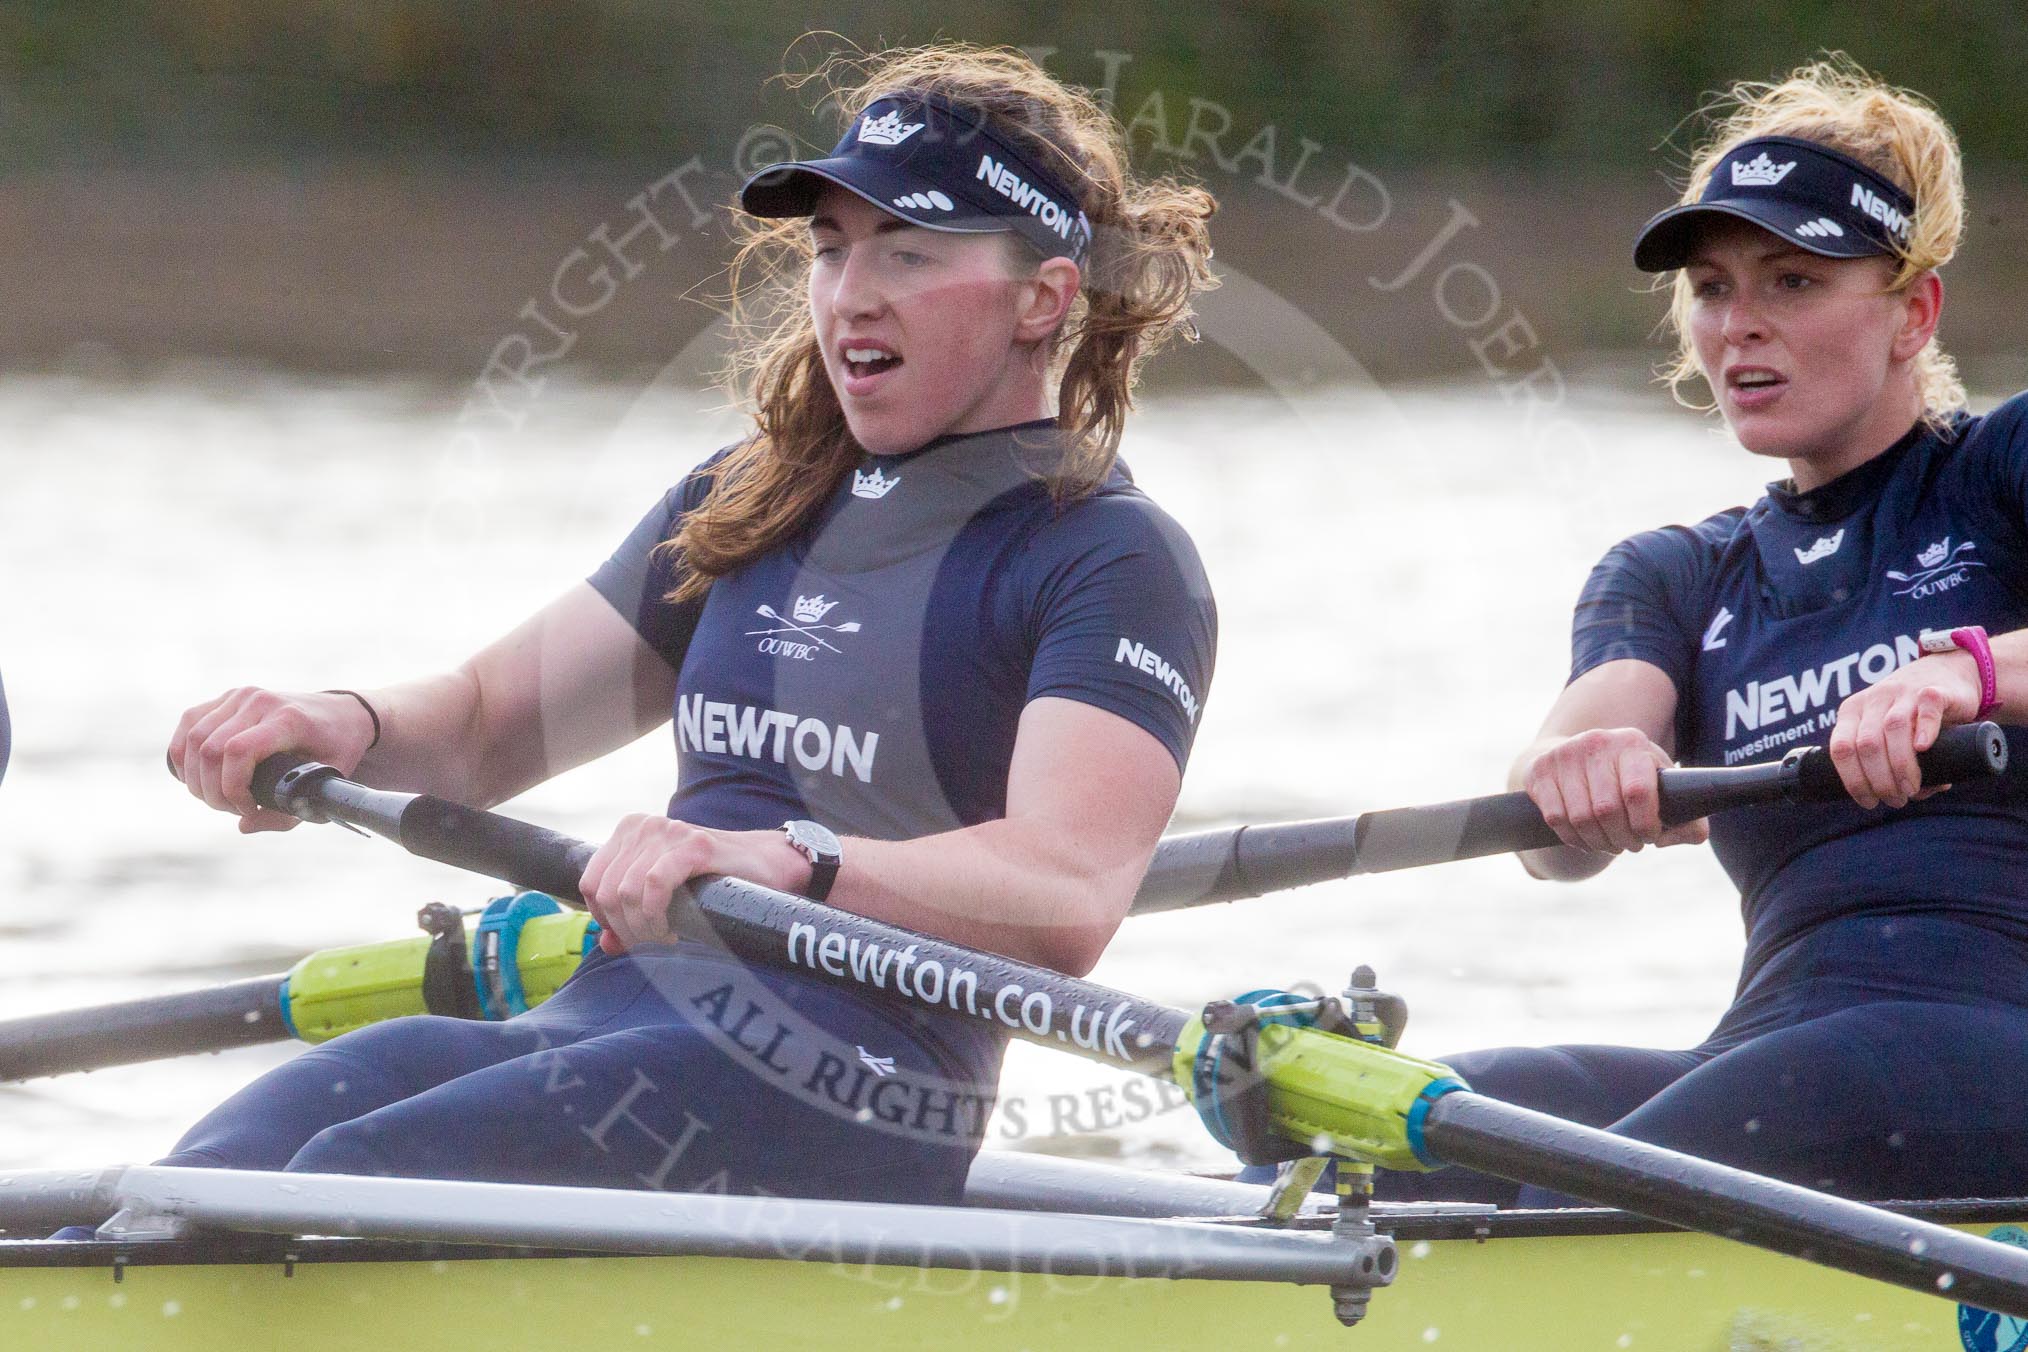 The Boat Race season 2016 - Women's Boat Race Trial Eights (OUWBC, Oxford): "Charybdis" , here 5-Ruth Siddorn, 4-Emma Spruce.
River Thames between Putney Bridge and Mortlake,
London SW15,

United Kingdom,
on 10 December 2015 at 12:29, image #256